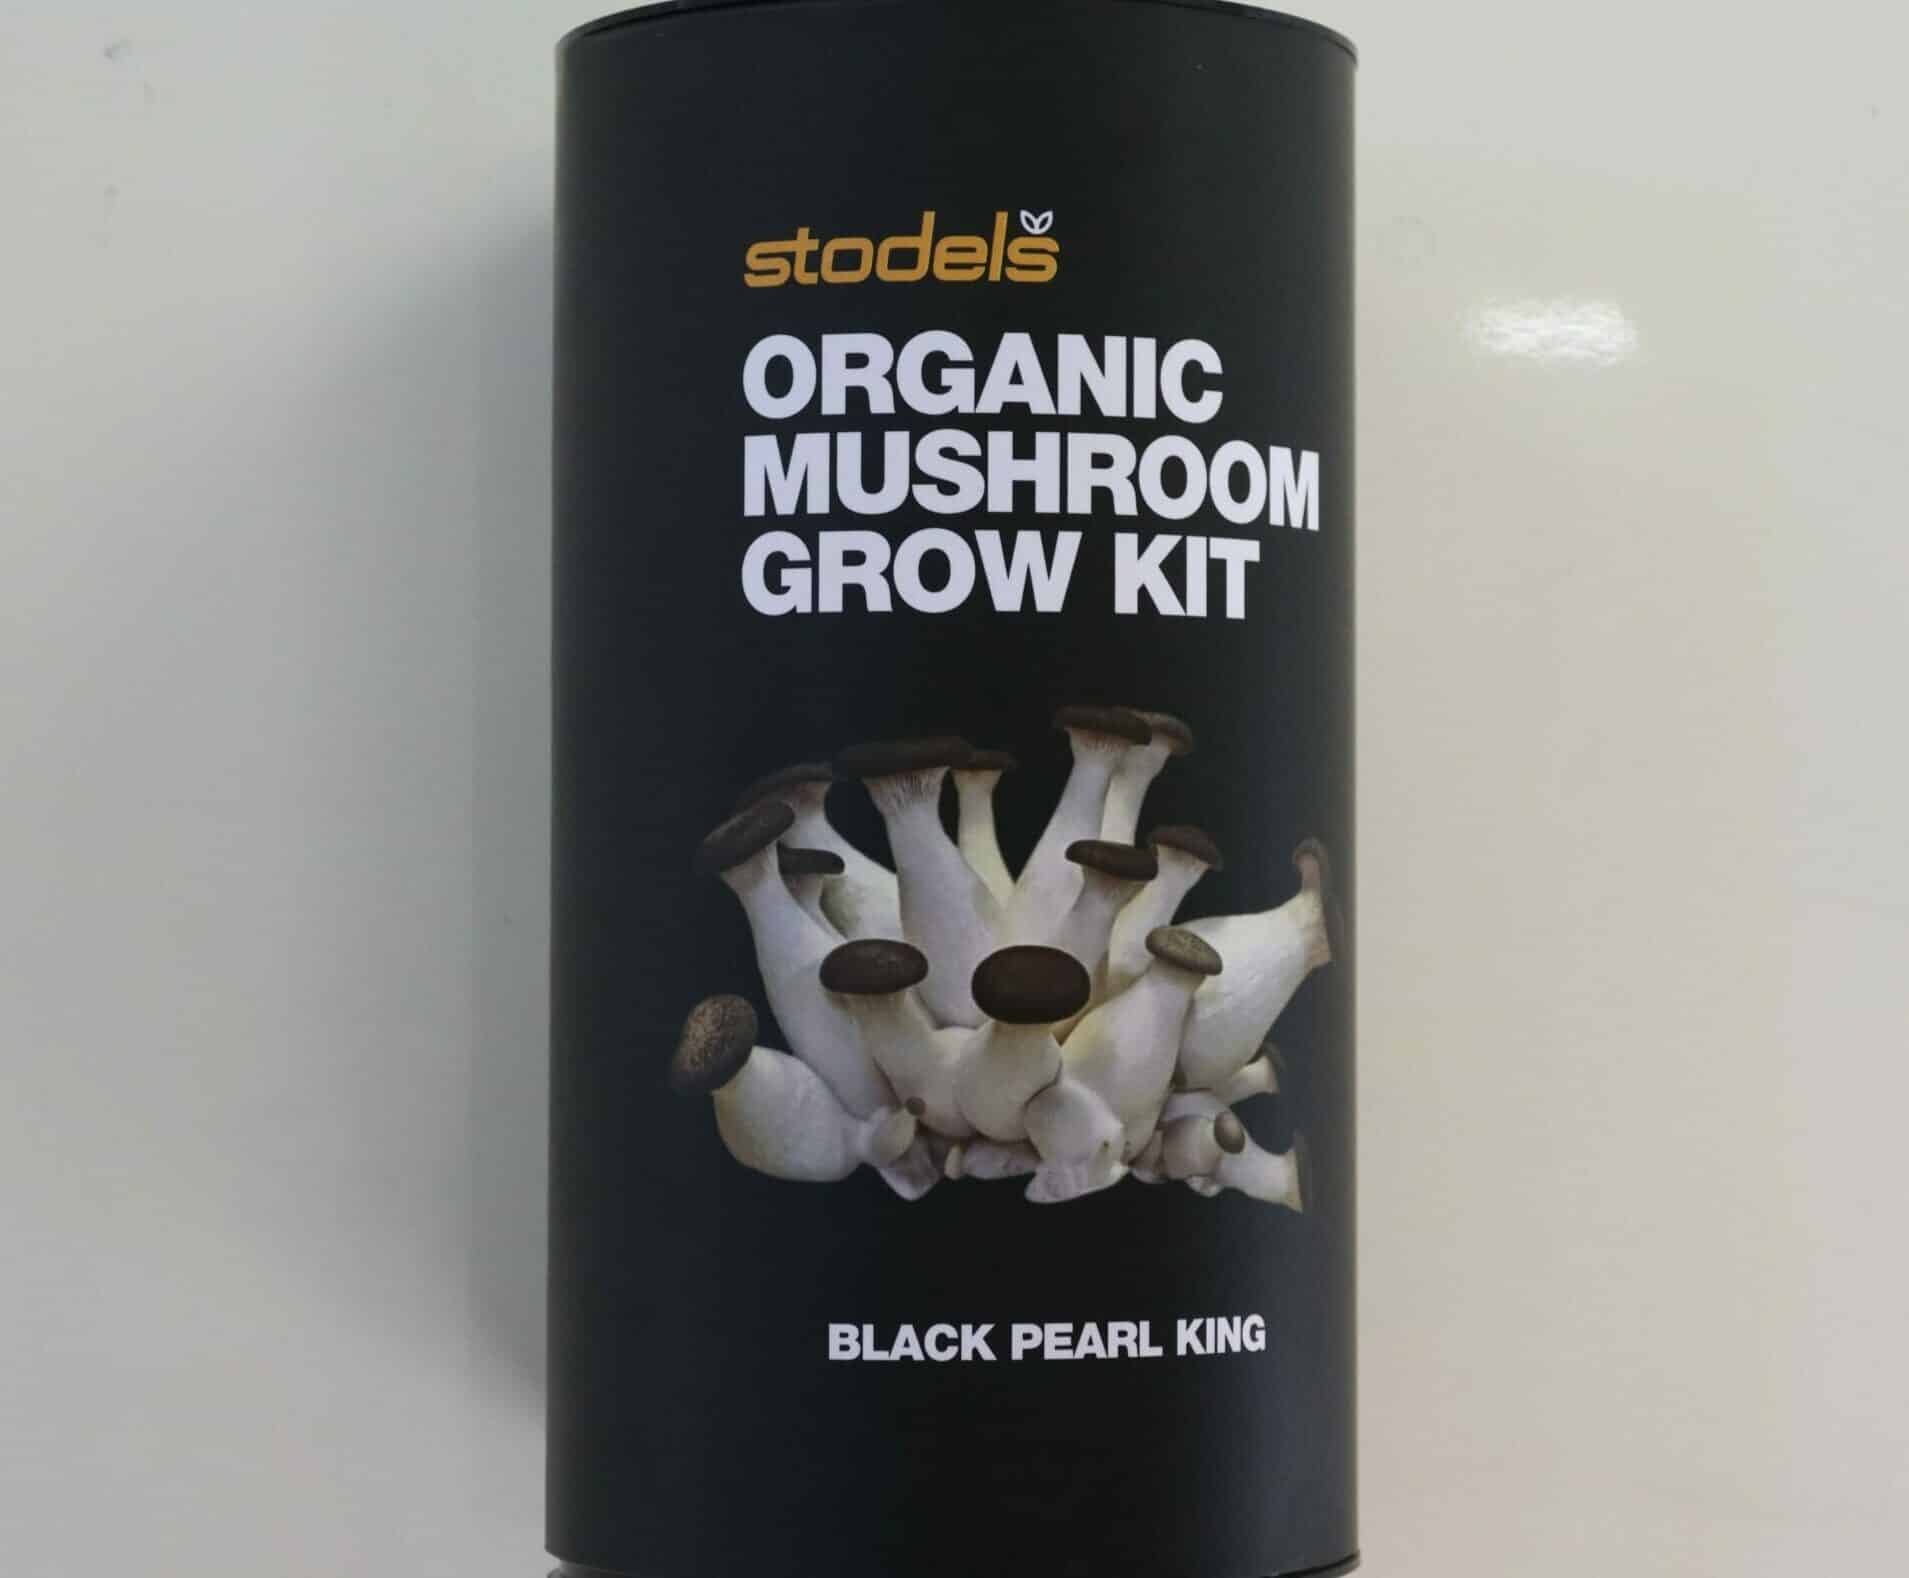 A black tube of Stodels organic mushrooom grow kit featuring black-topped white mushrooms and the text Black Pearl King.